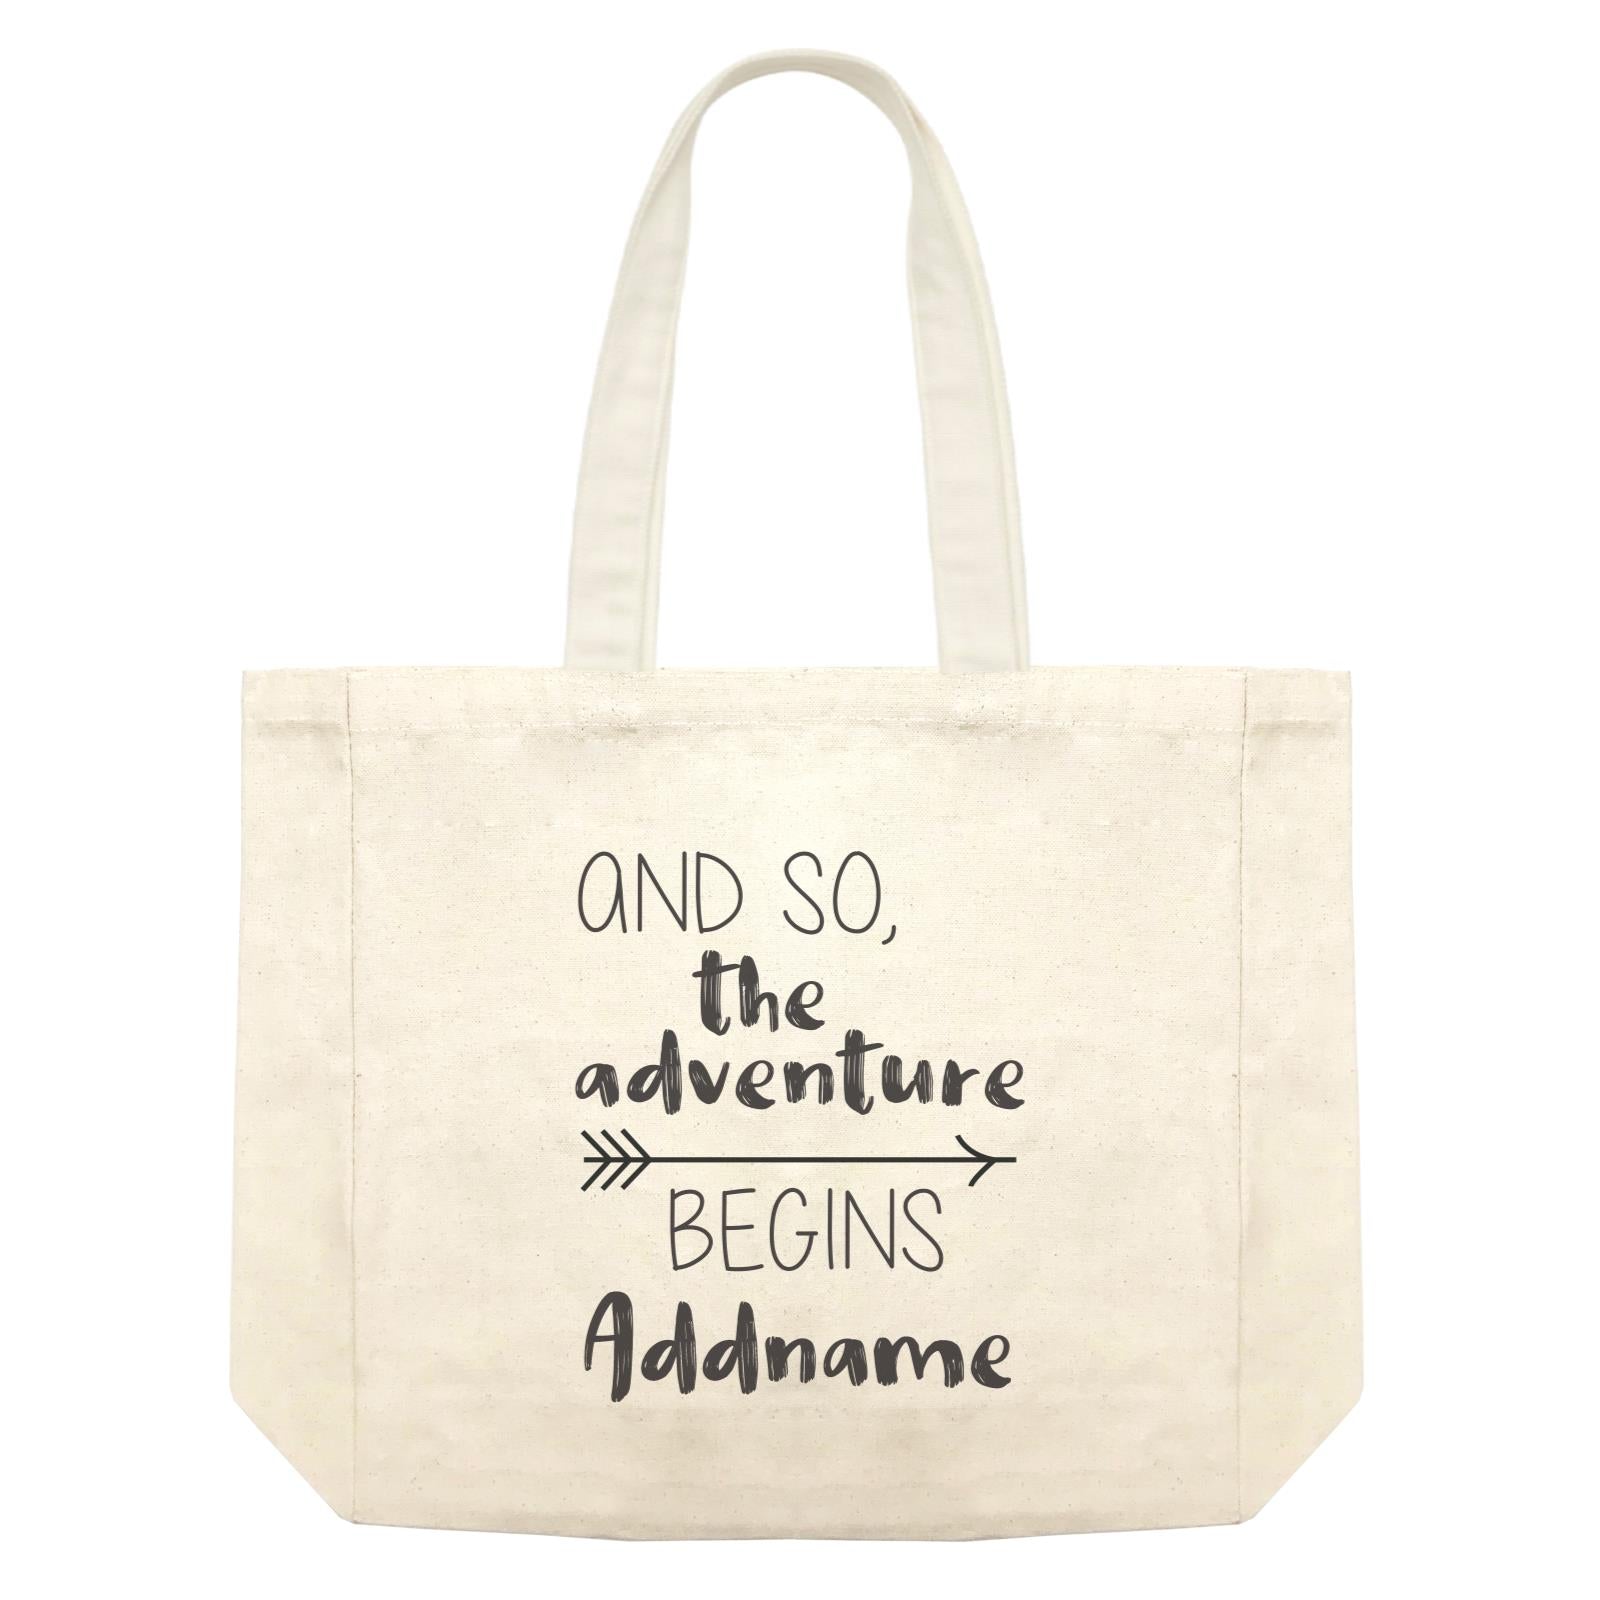 Travel Quotes And So The Adventure Begins Addname Shopping Bag